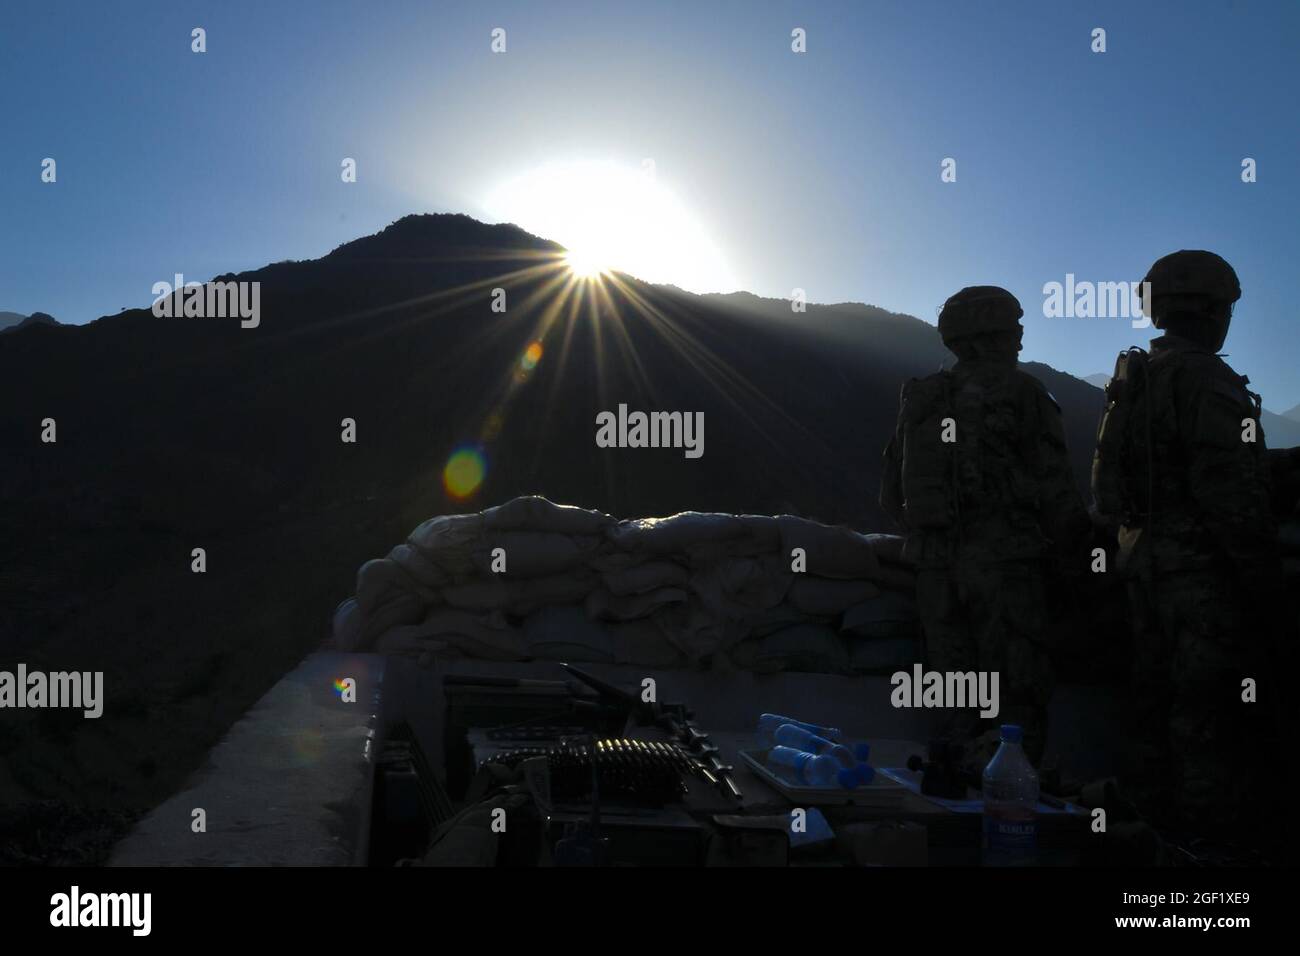 Soldiers assigned to Company B, 2nd Battalion, 27th Infantry Regiment, Task Force No Fear, 3rd Brigade Combat Team, 25th Infantry Division, TF Bronco, pull guard duty as the sun rises over Observation Post Coleman outside of Combat Outpost Monti in eastern Afghanistan's Kunar Province May 5. OP Coleman is situated at the mouth of the Pech River Valley and the Kunar River Valley, which is some of the most dangerous terrain in Afghanistan. Stock Photo